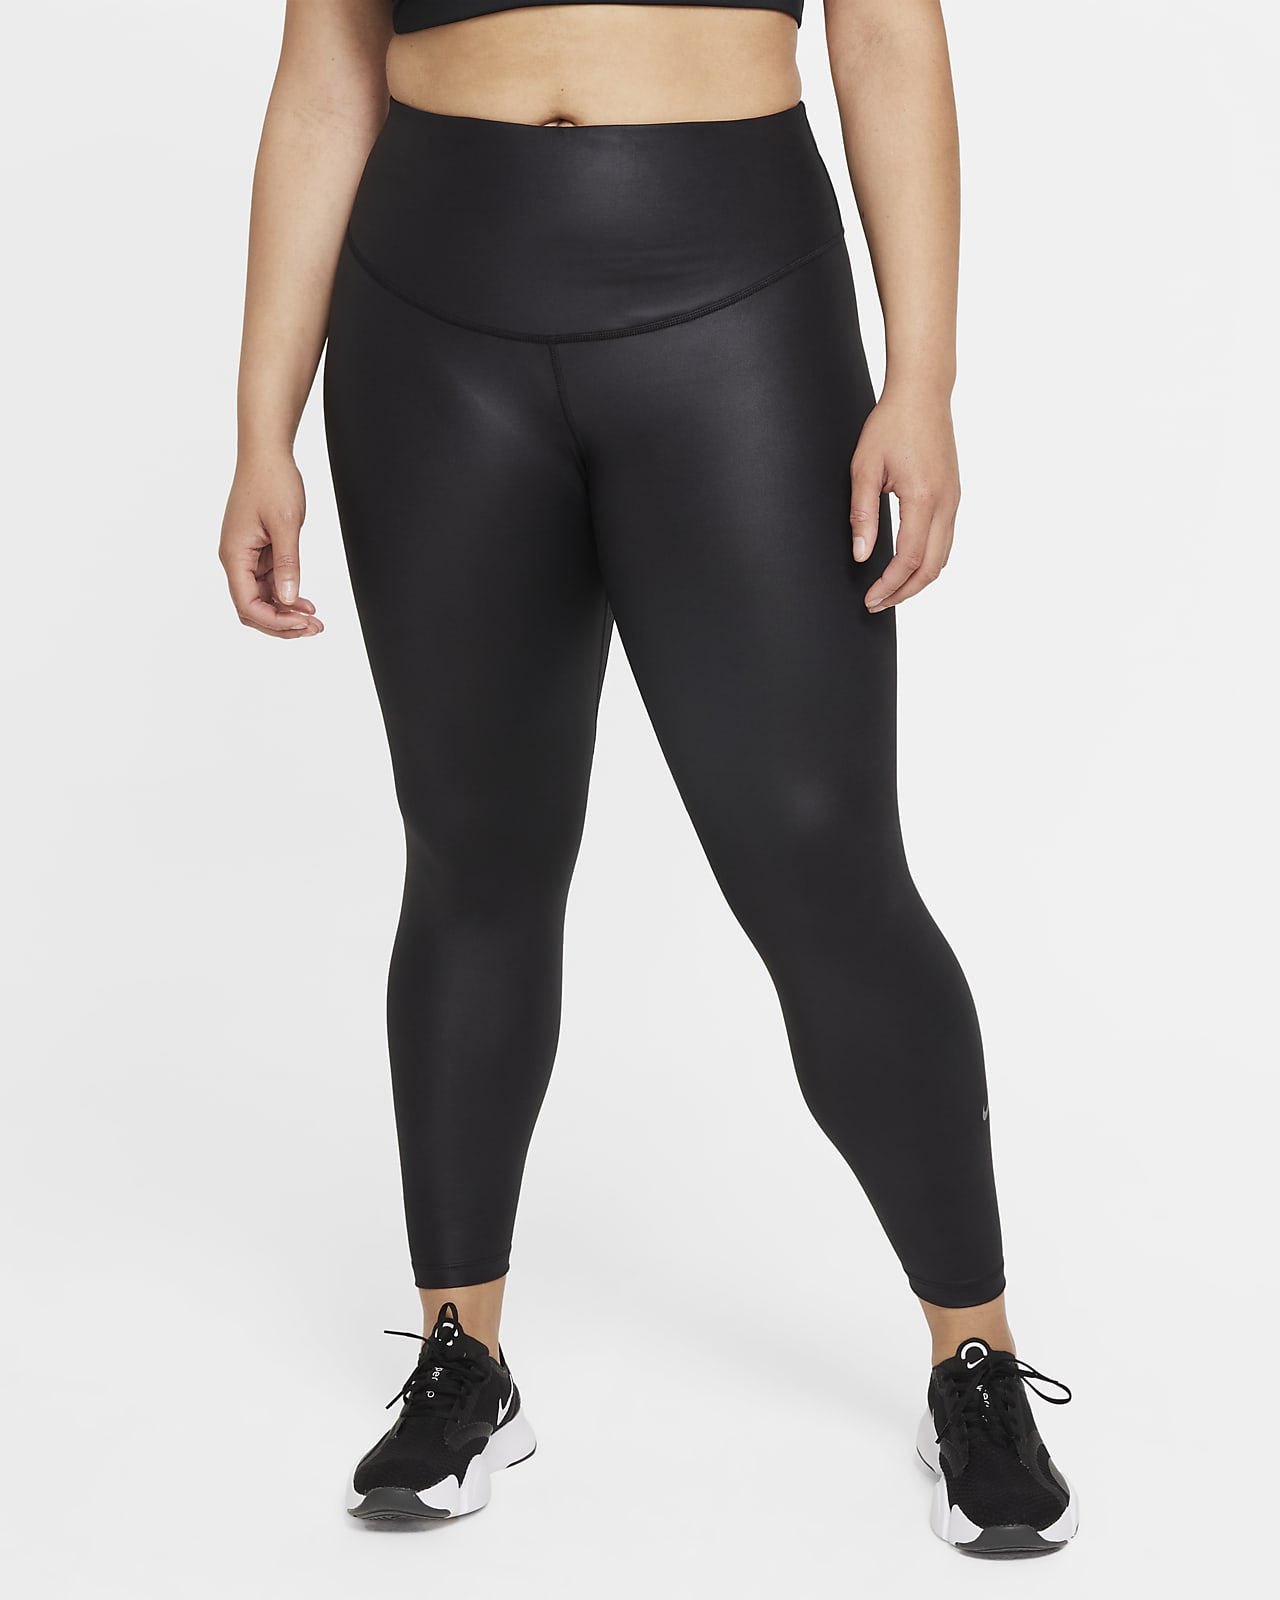 Faux Leather Leggings Plus Size Nike, White Leather Tights